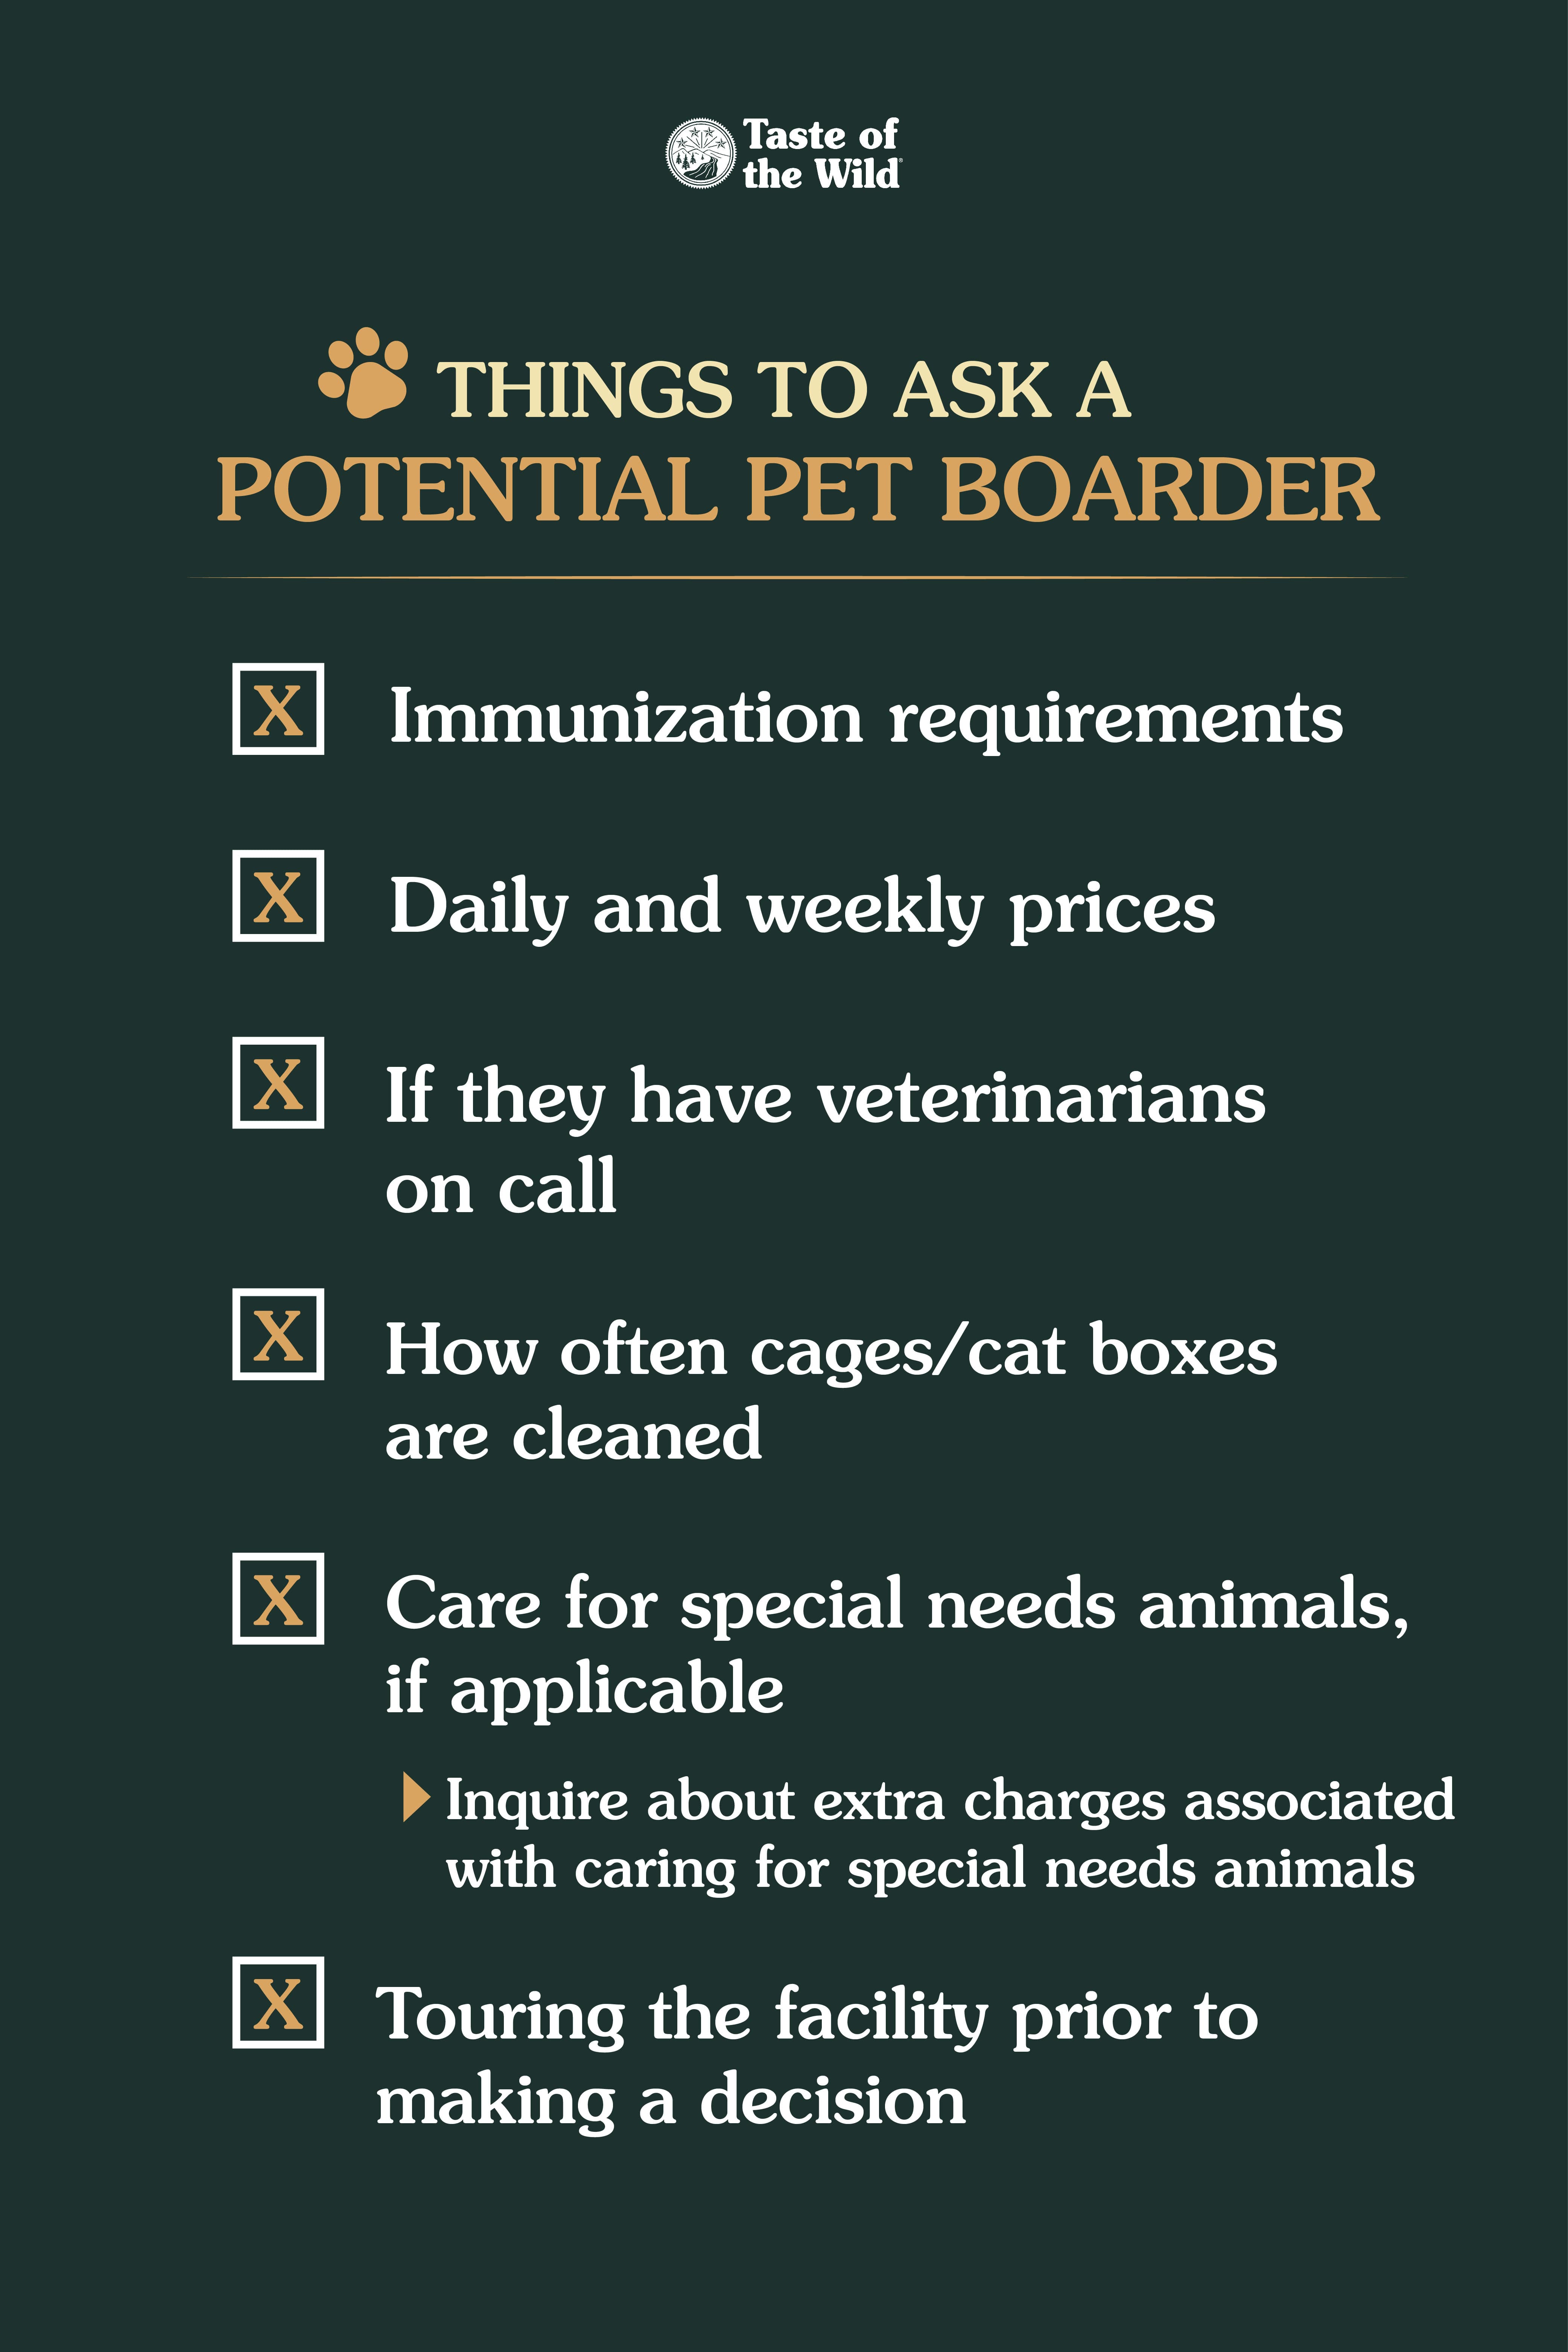 Checklist of Items to Ask Pet Boarder Infographic | Taste of the Wild